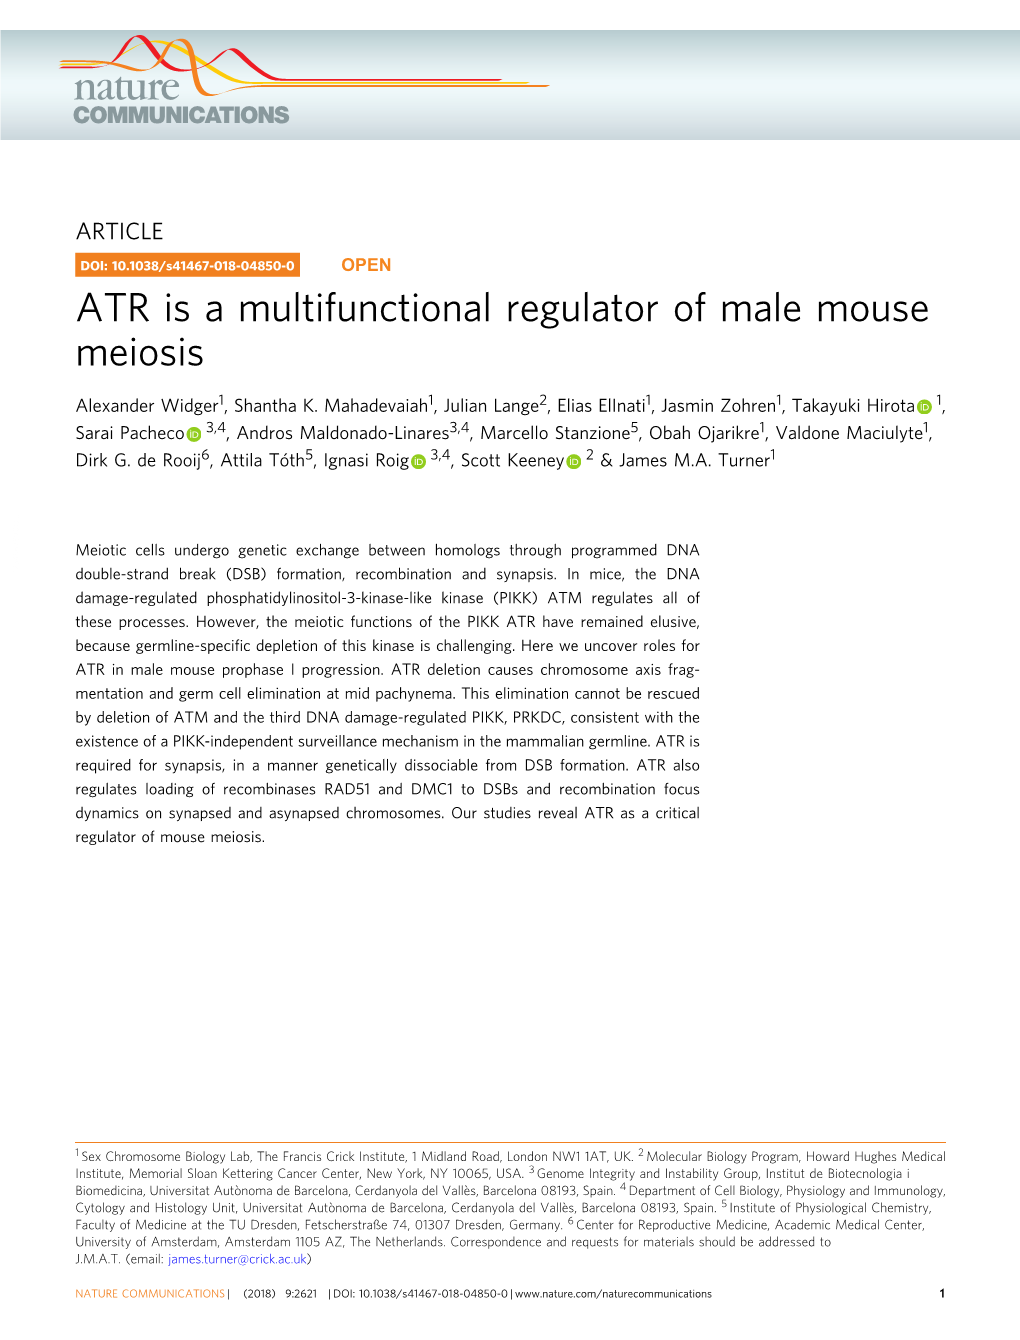 ATR Is a Multifunctional Regulator of Male Mouse Meiosis